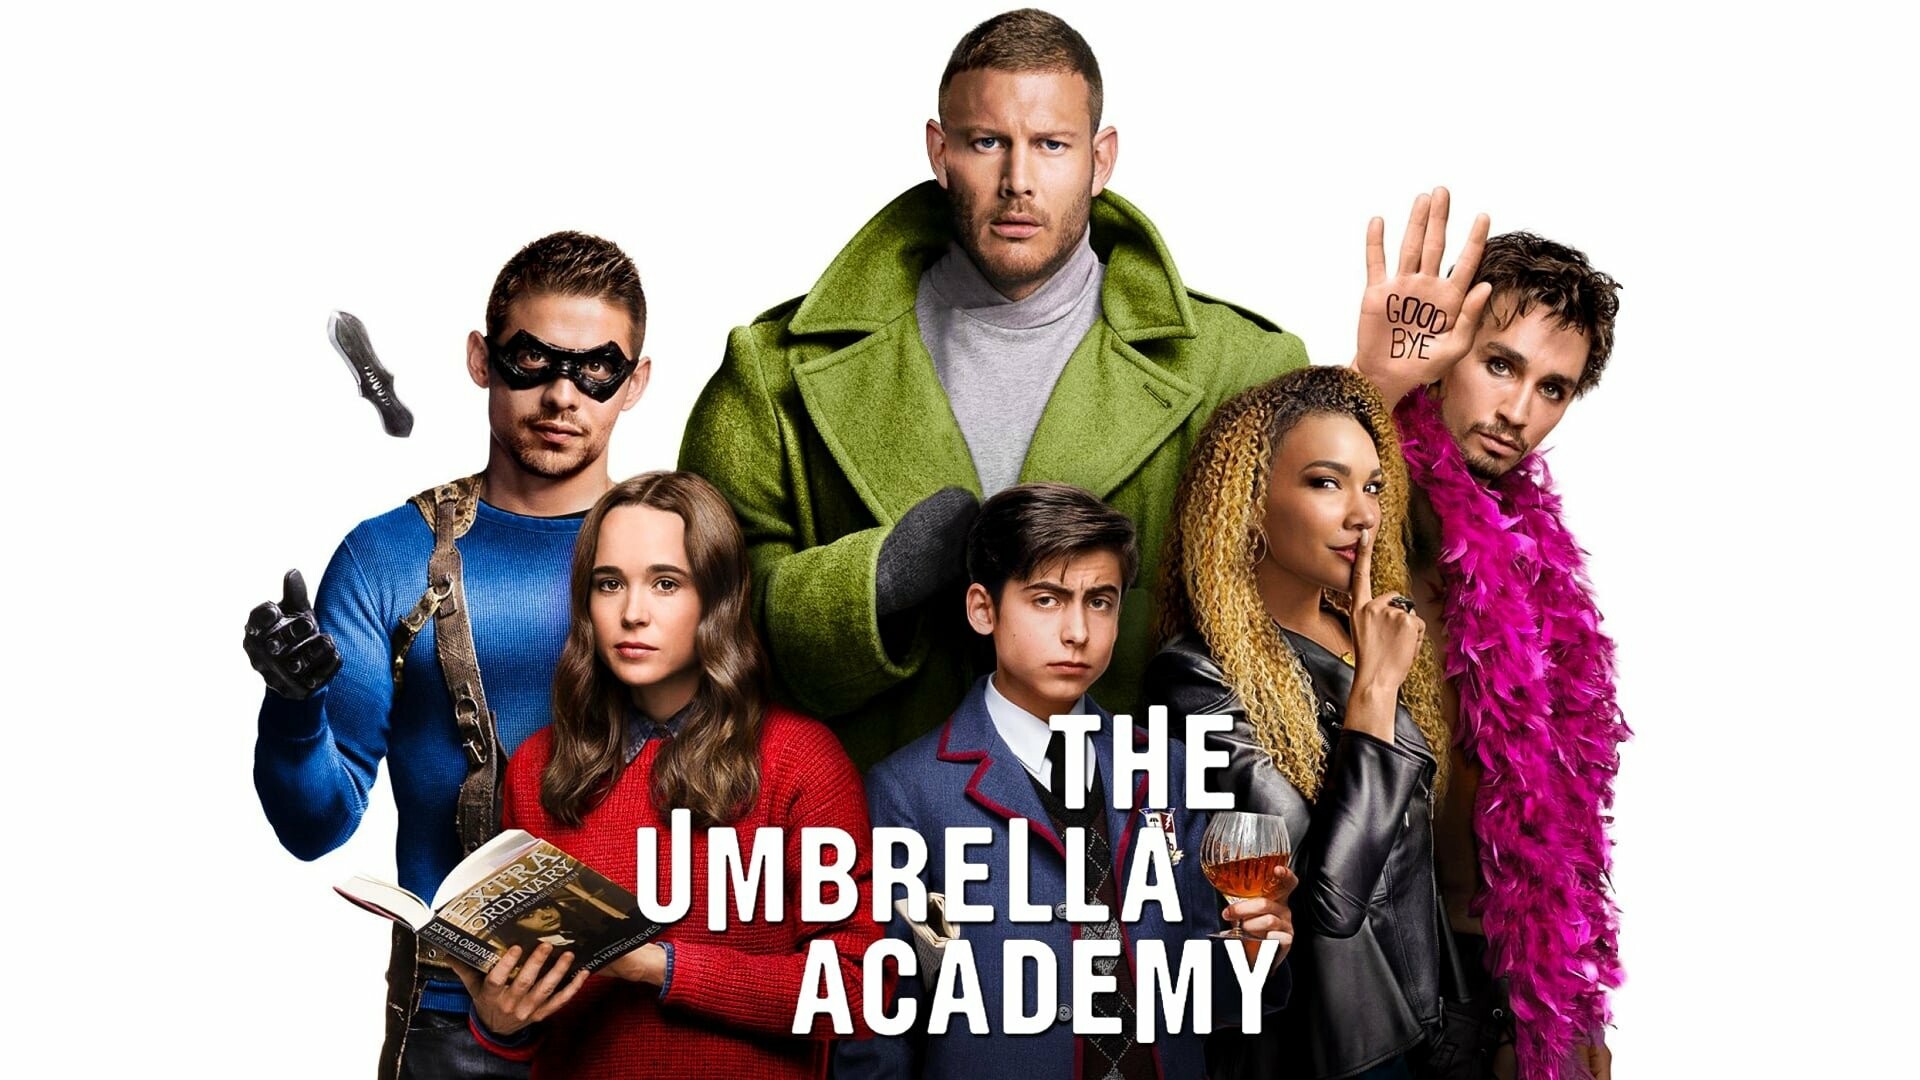 The Umbrella Academy: The series, Based on the comic book series of the same name created by Gerard Way, frontman of My Chemical Romance. 1920x1080 Full HD Background.